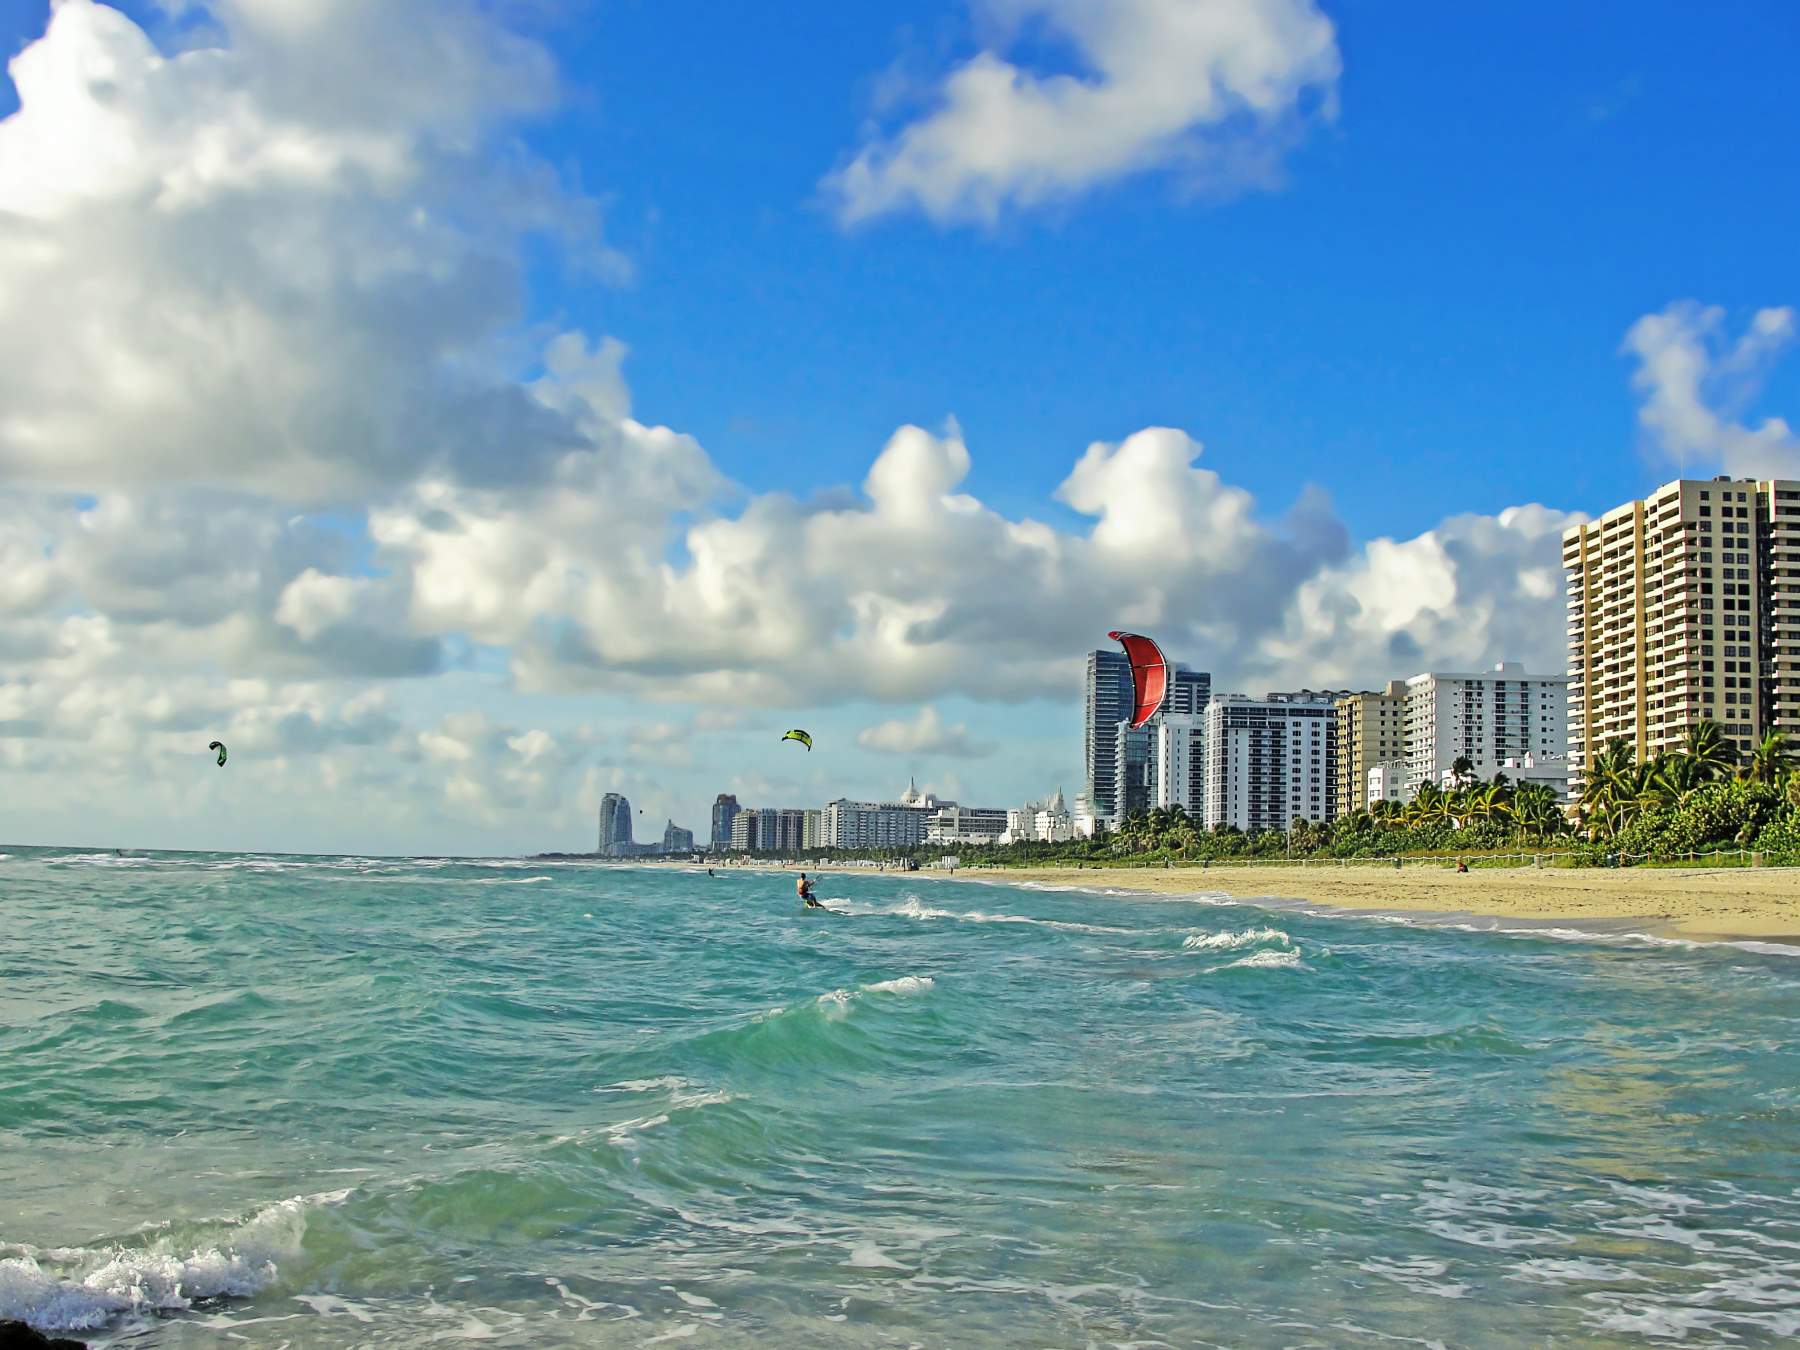 Where to Stay in Miami - Endless Travel Destinations